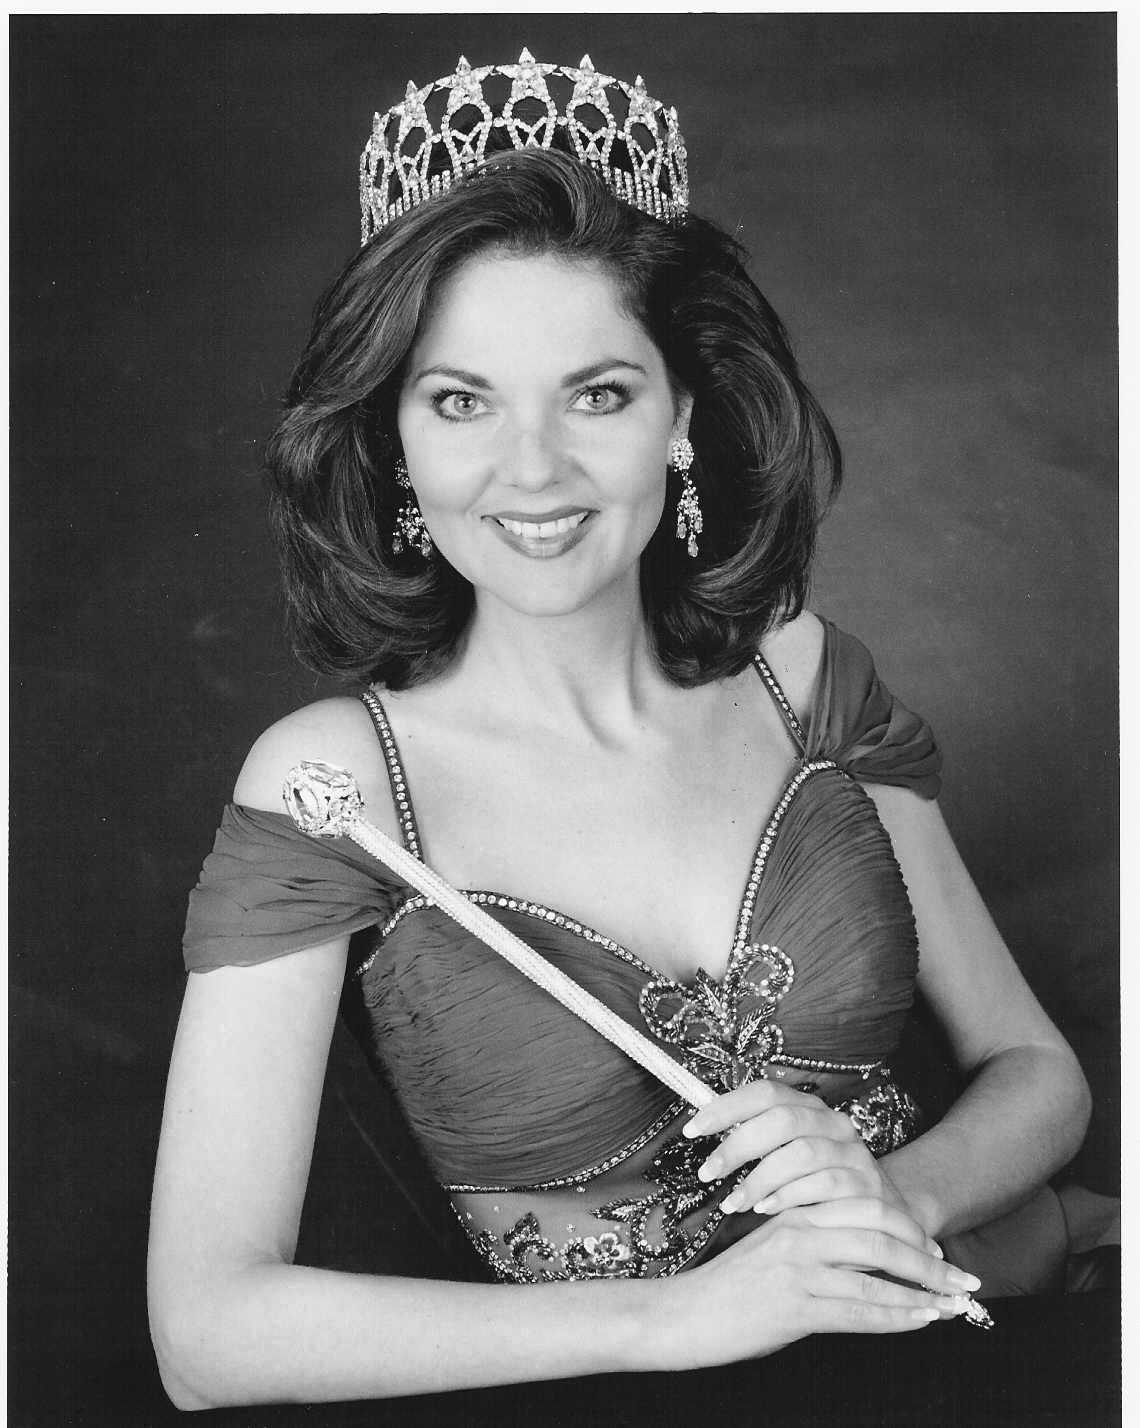 Susan Jeske, former Ms. America is now on a mission to make people aware of toxic chemicals found in cosmetic and personal care products. (Photo: Ken Herczeg)